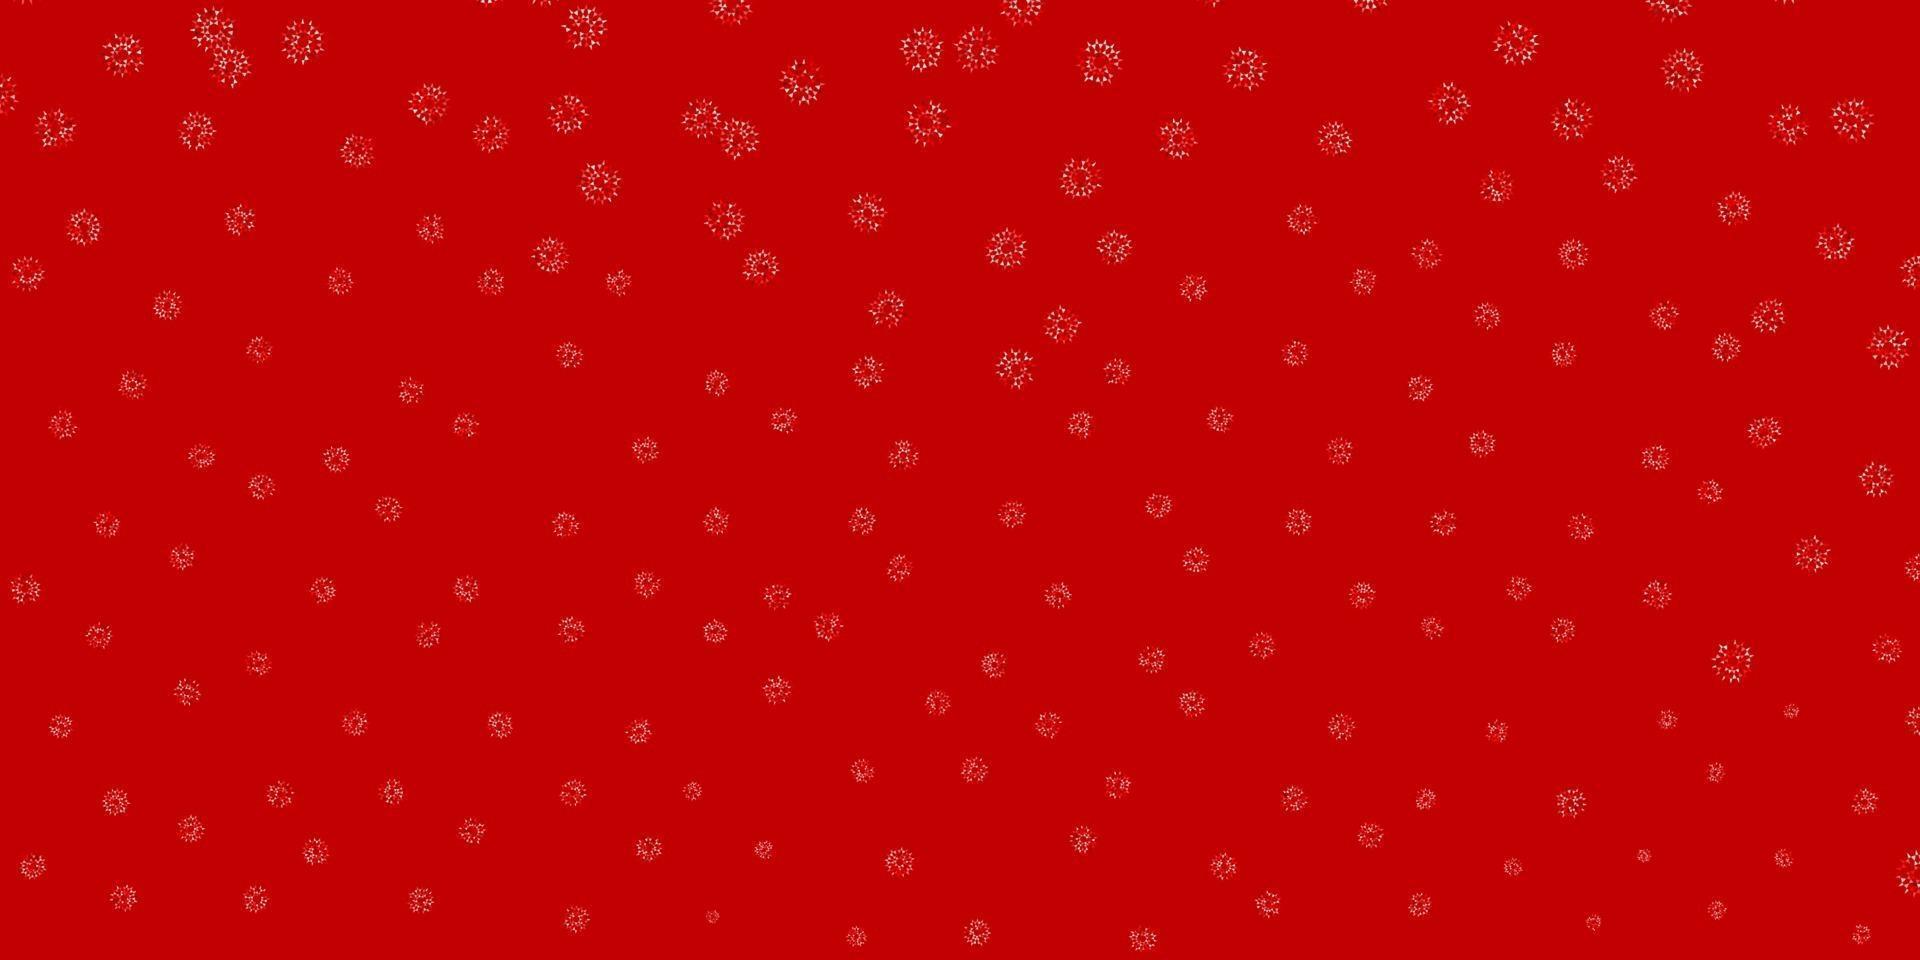 Light red vector doodle pattern with flowers.